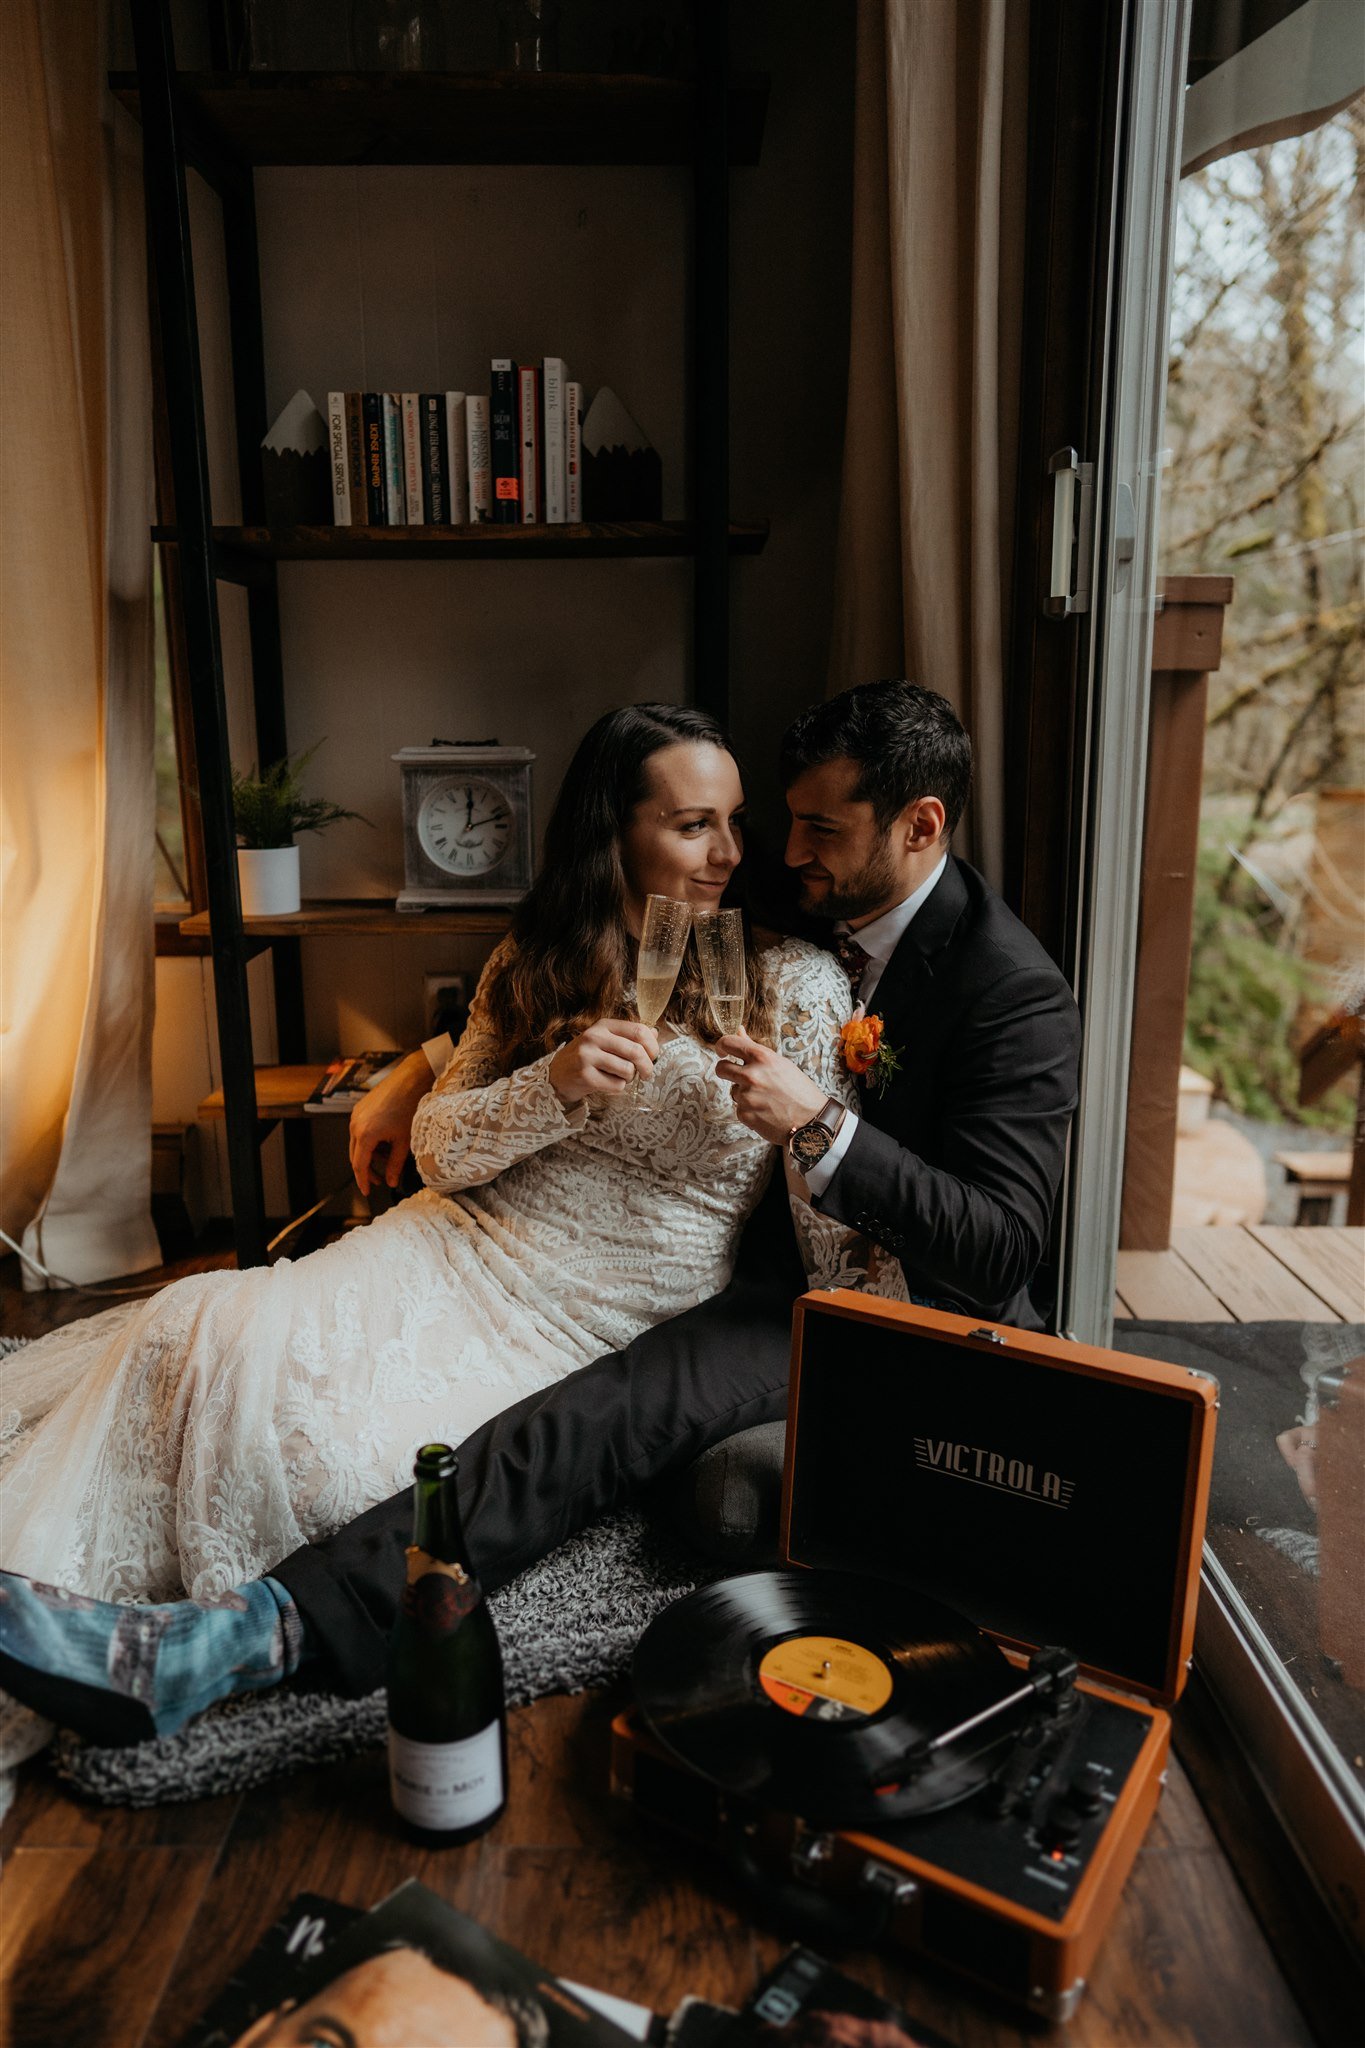 Bride and groom sit on the floor eating a cheese board after their snowy mountain elopement in Washington